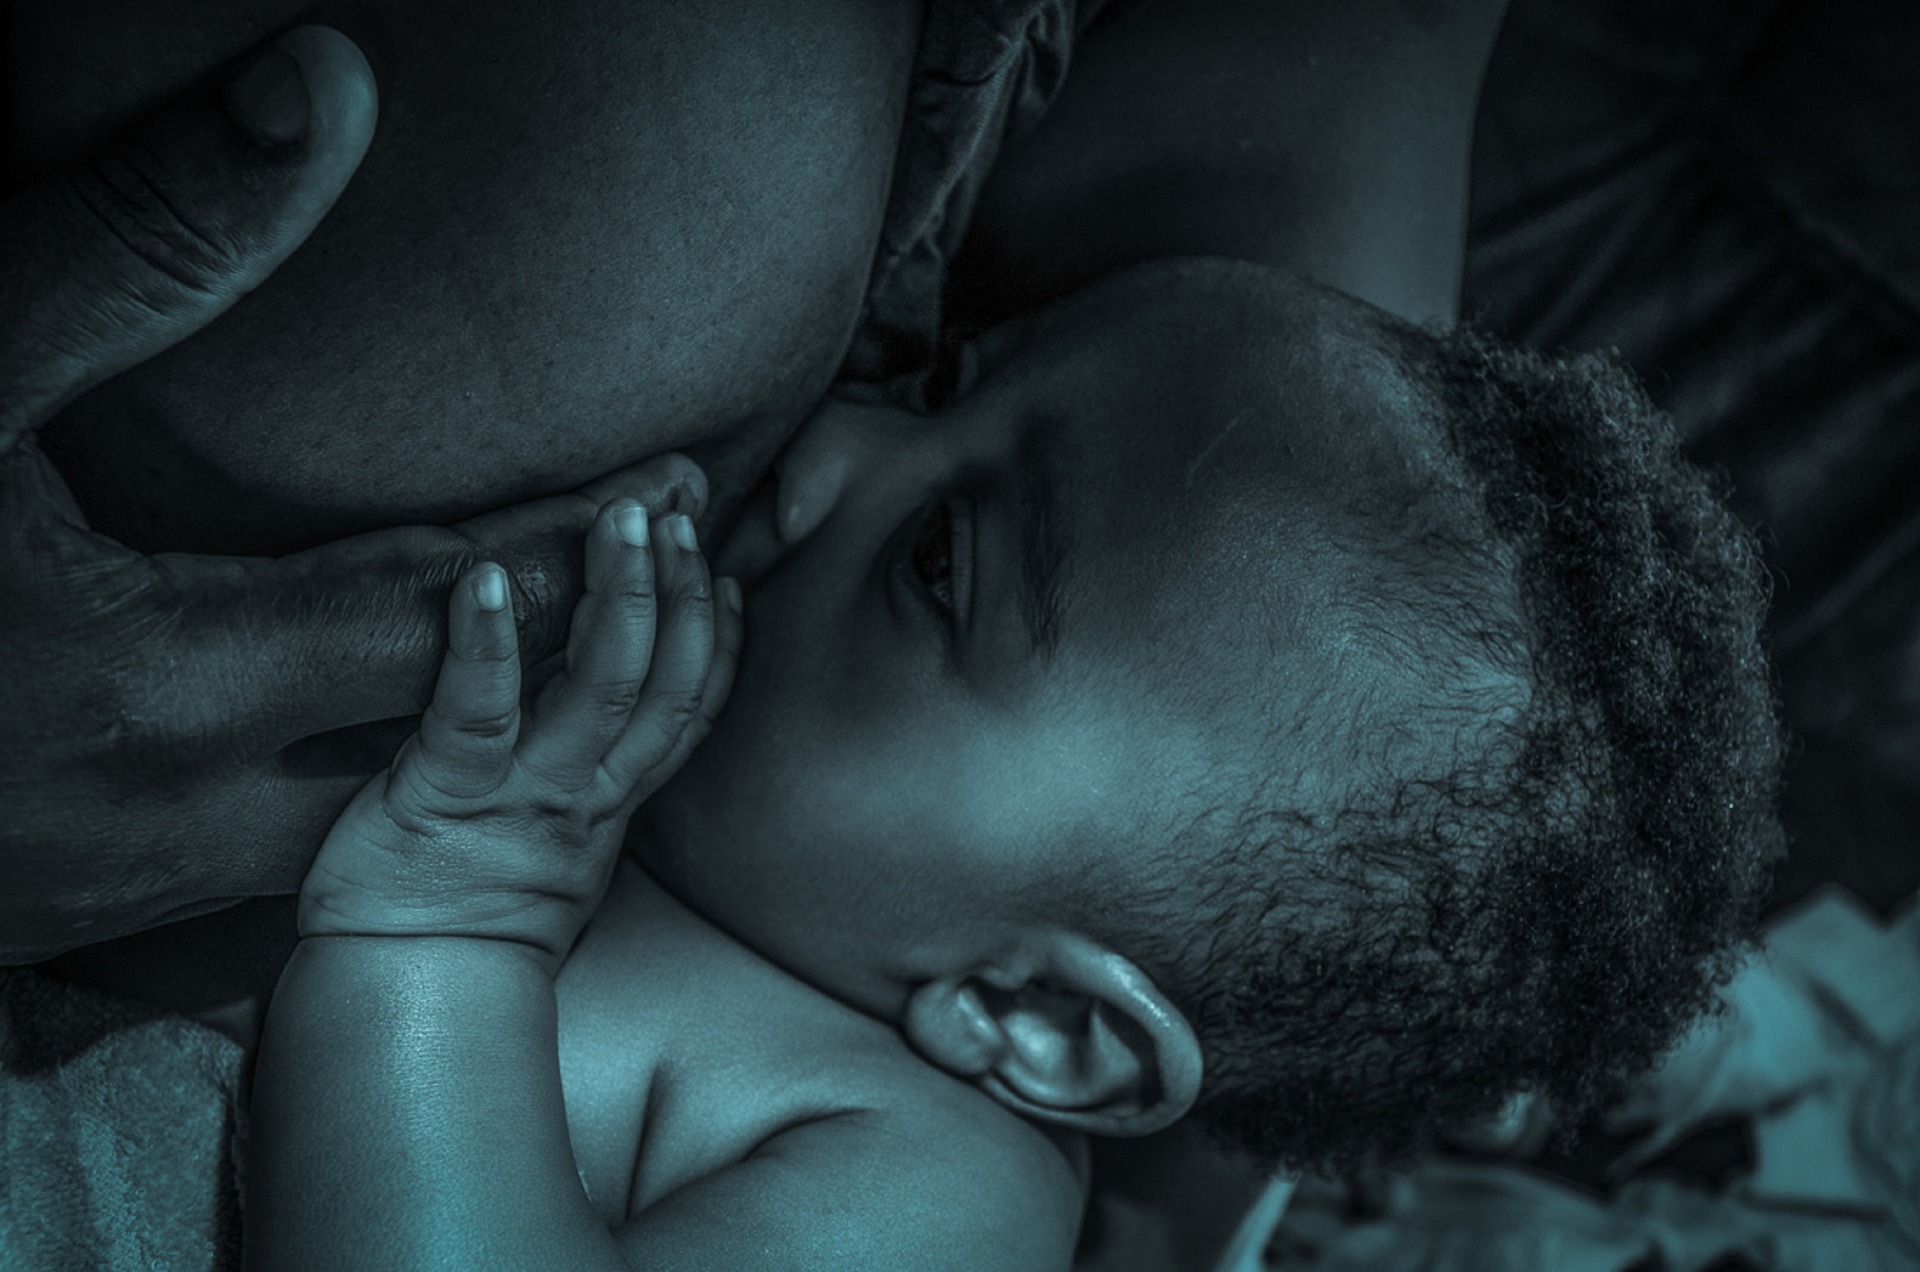 South Africa breastfeeding article